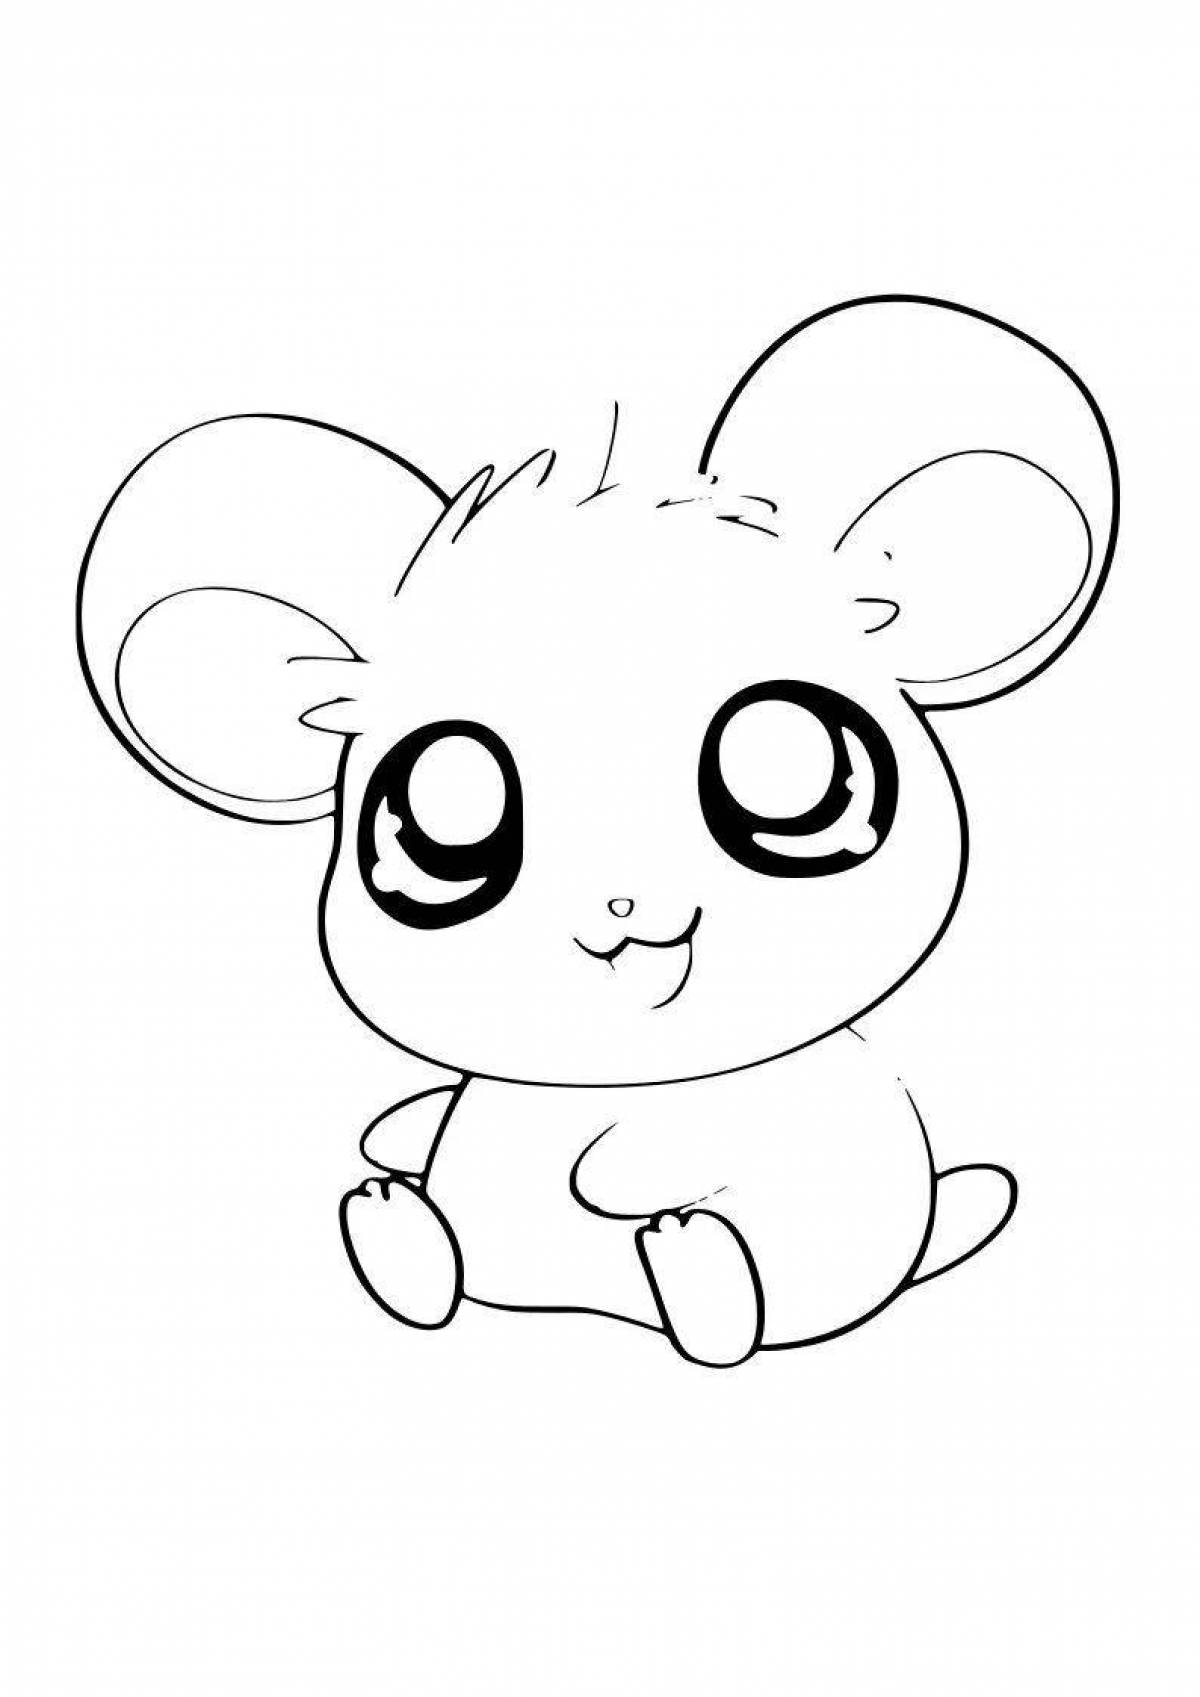 Irresistible coloring pages cute animals